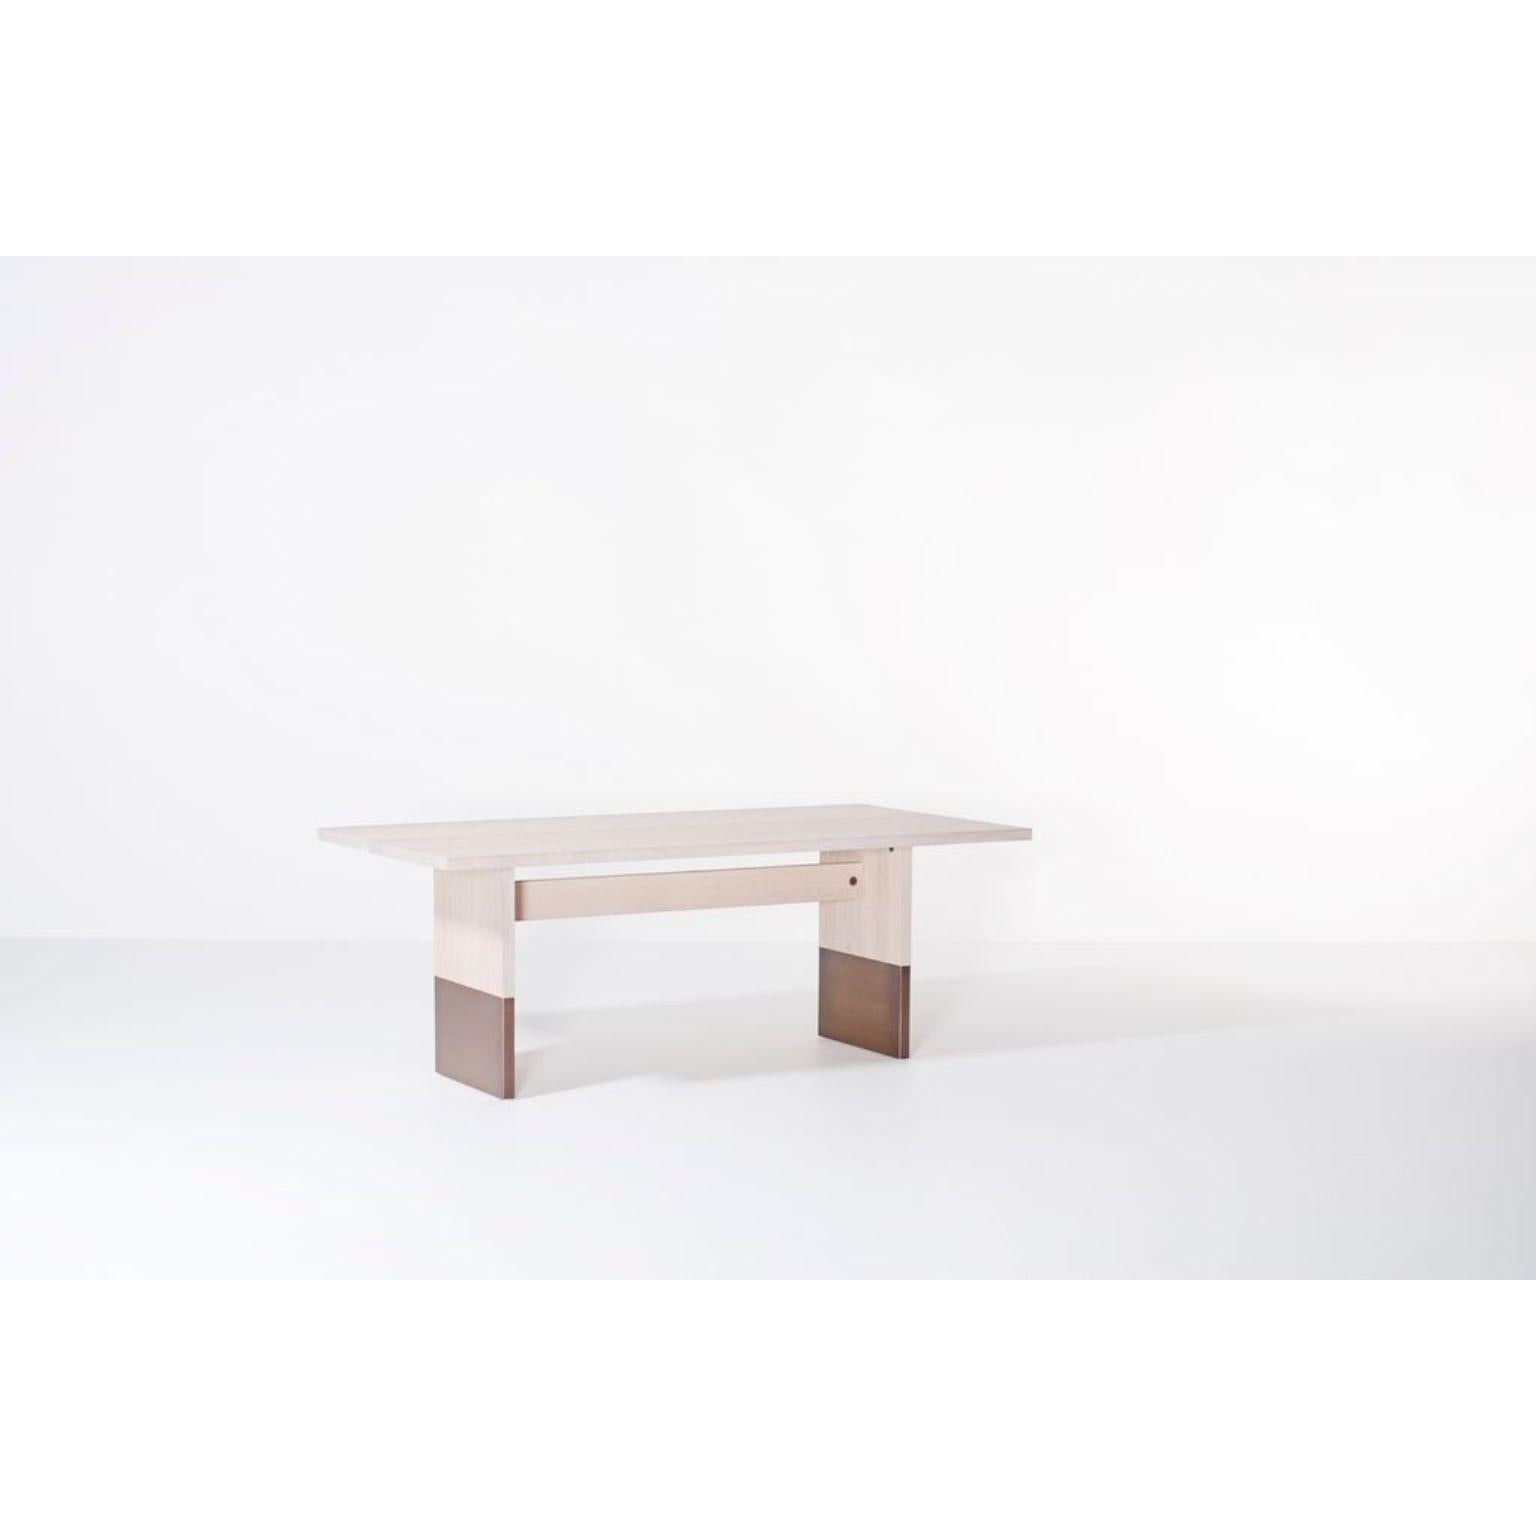 Nota Bene rectangular dining table by Van Rossum.
Dimensions: D200 x W100 x H75 cm
Materials: Oak, brass.

The wood is available in all standard Van Rossum colors, or in a matching finish to customer’s own sample.
Detailing is available in